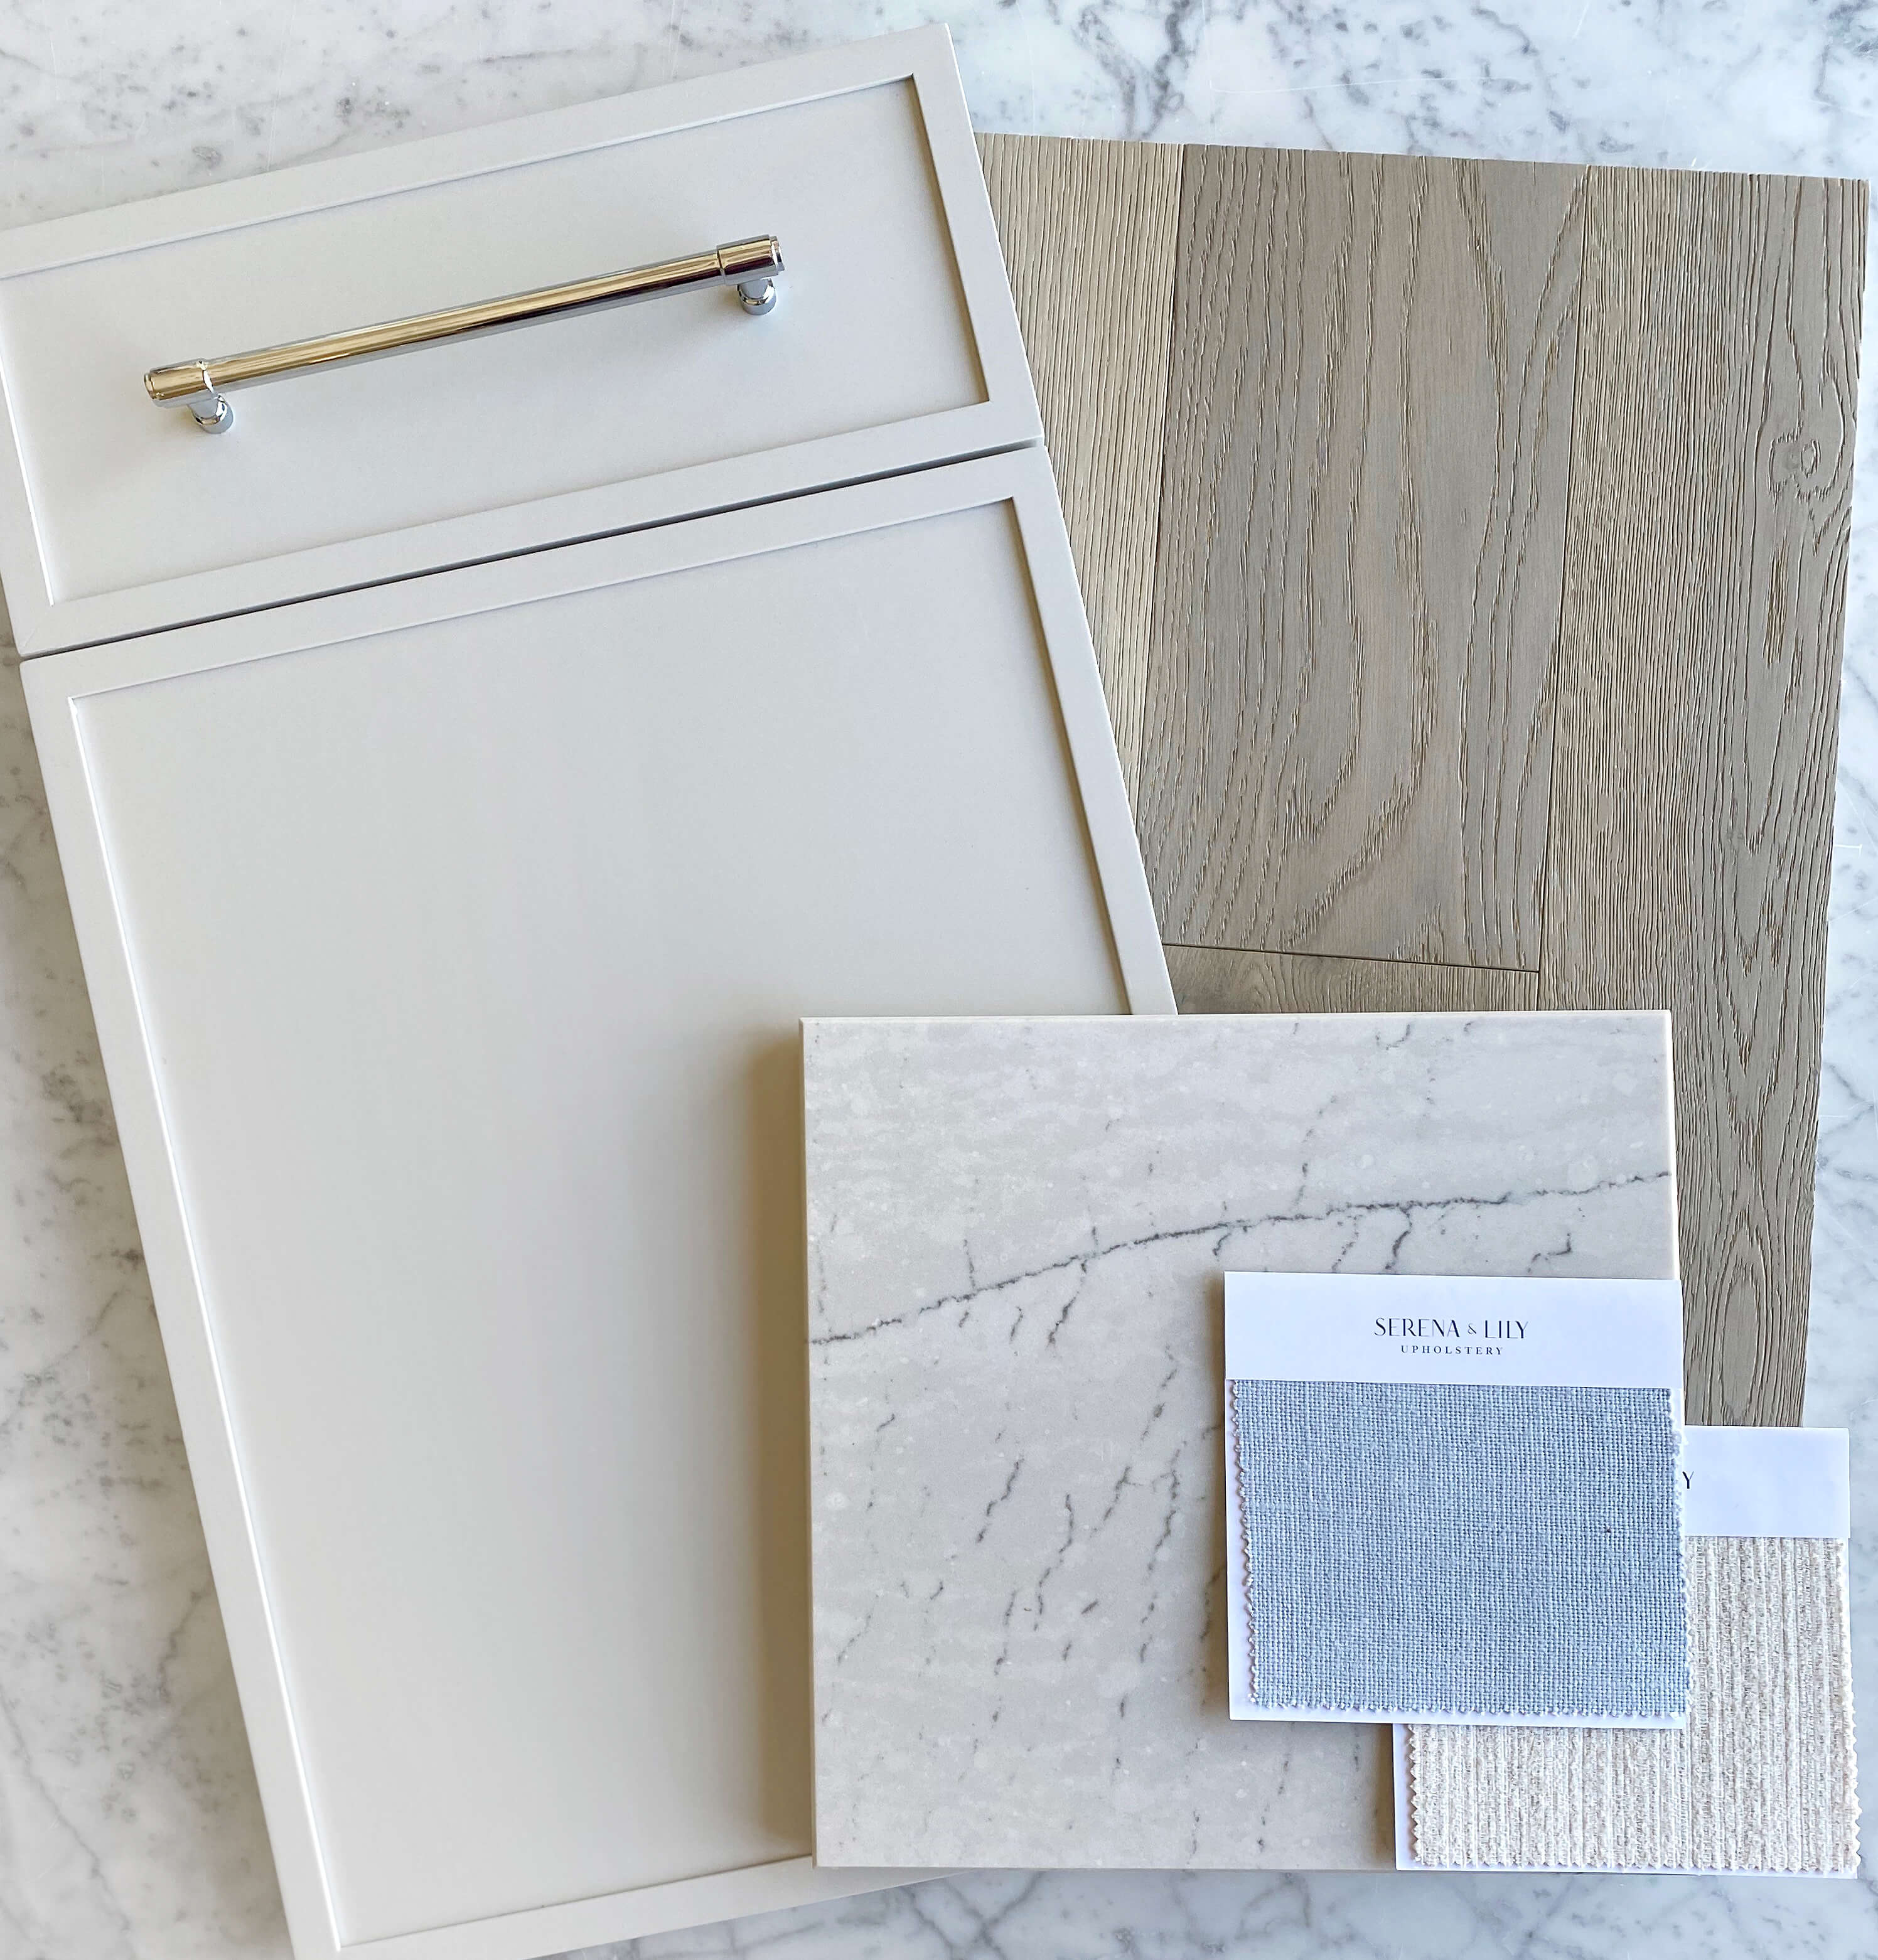 This mood board features Dura Supreme's Reese door style in Pearl paint.